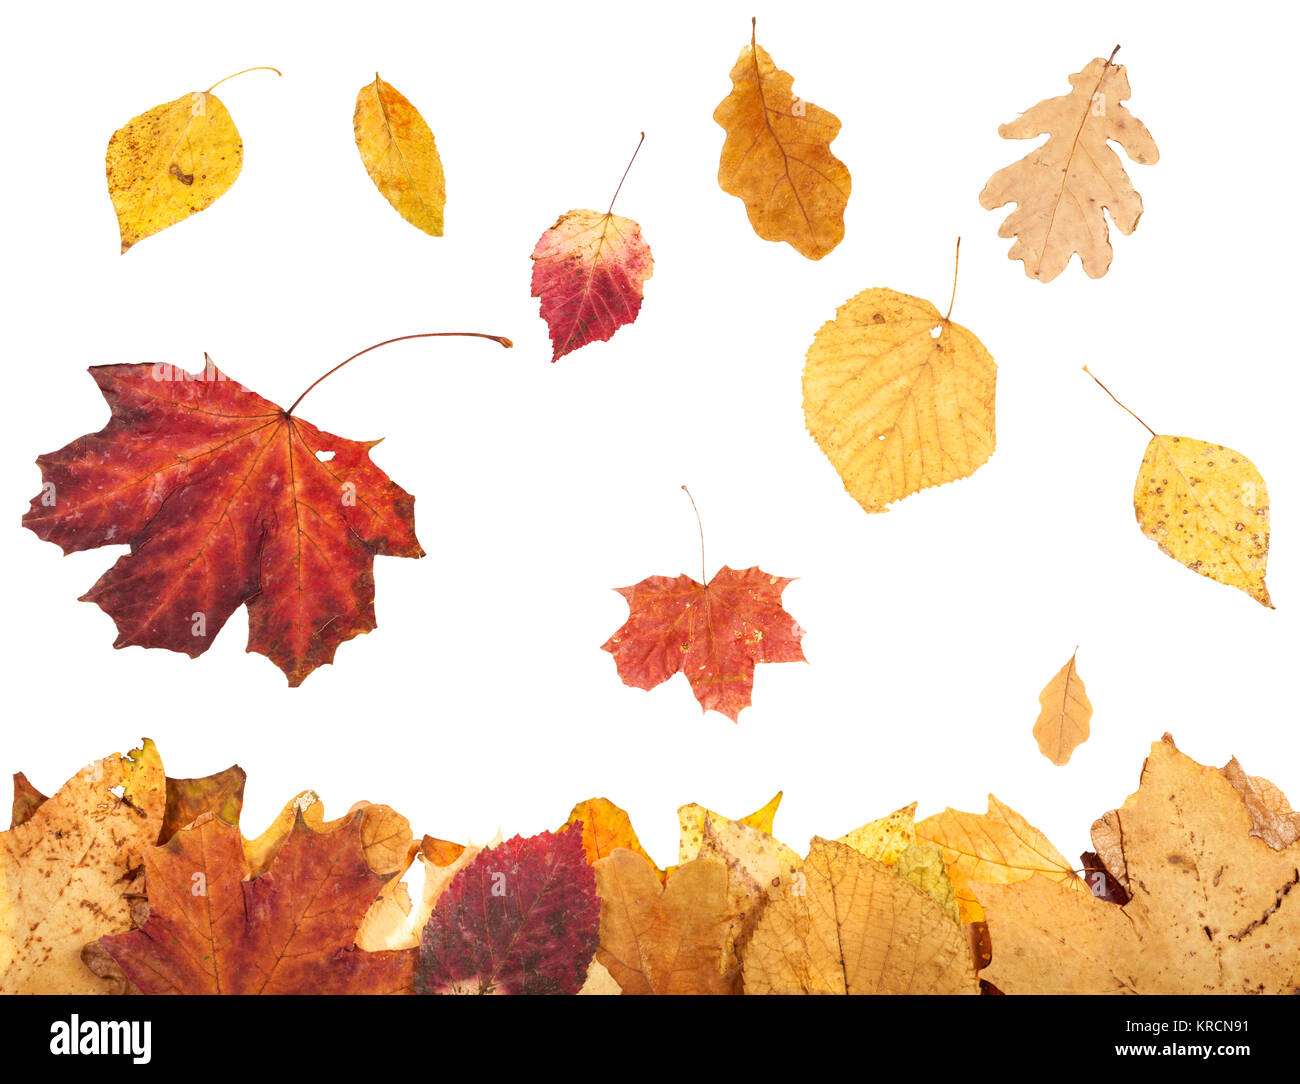 leaf litter and falling autumn leaves isolated Stock Photo